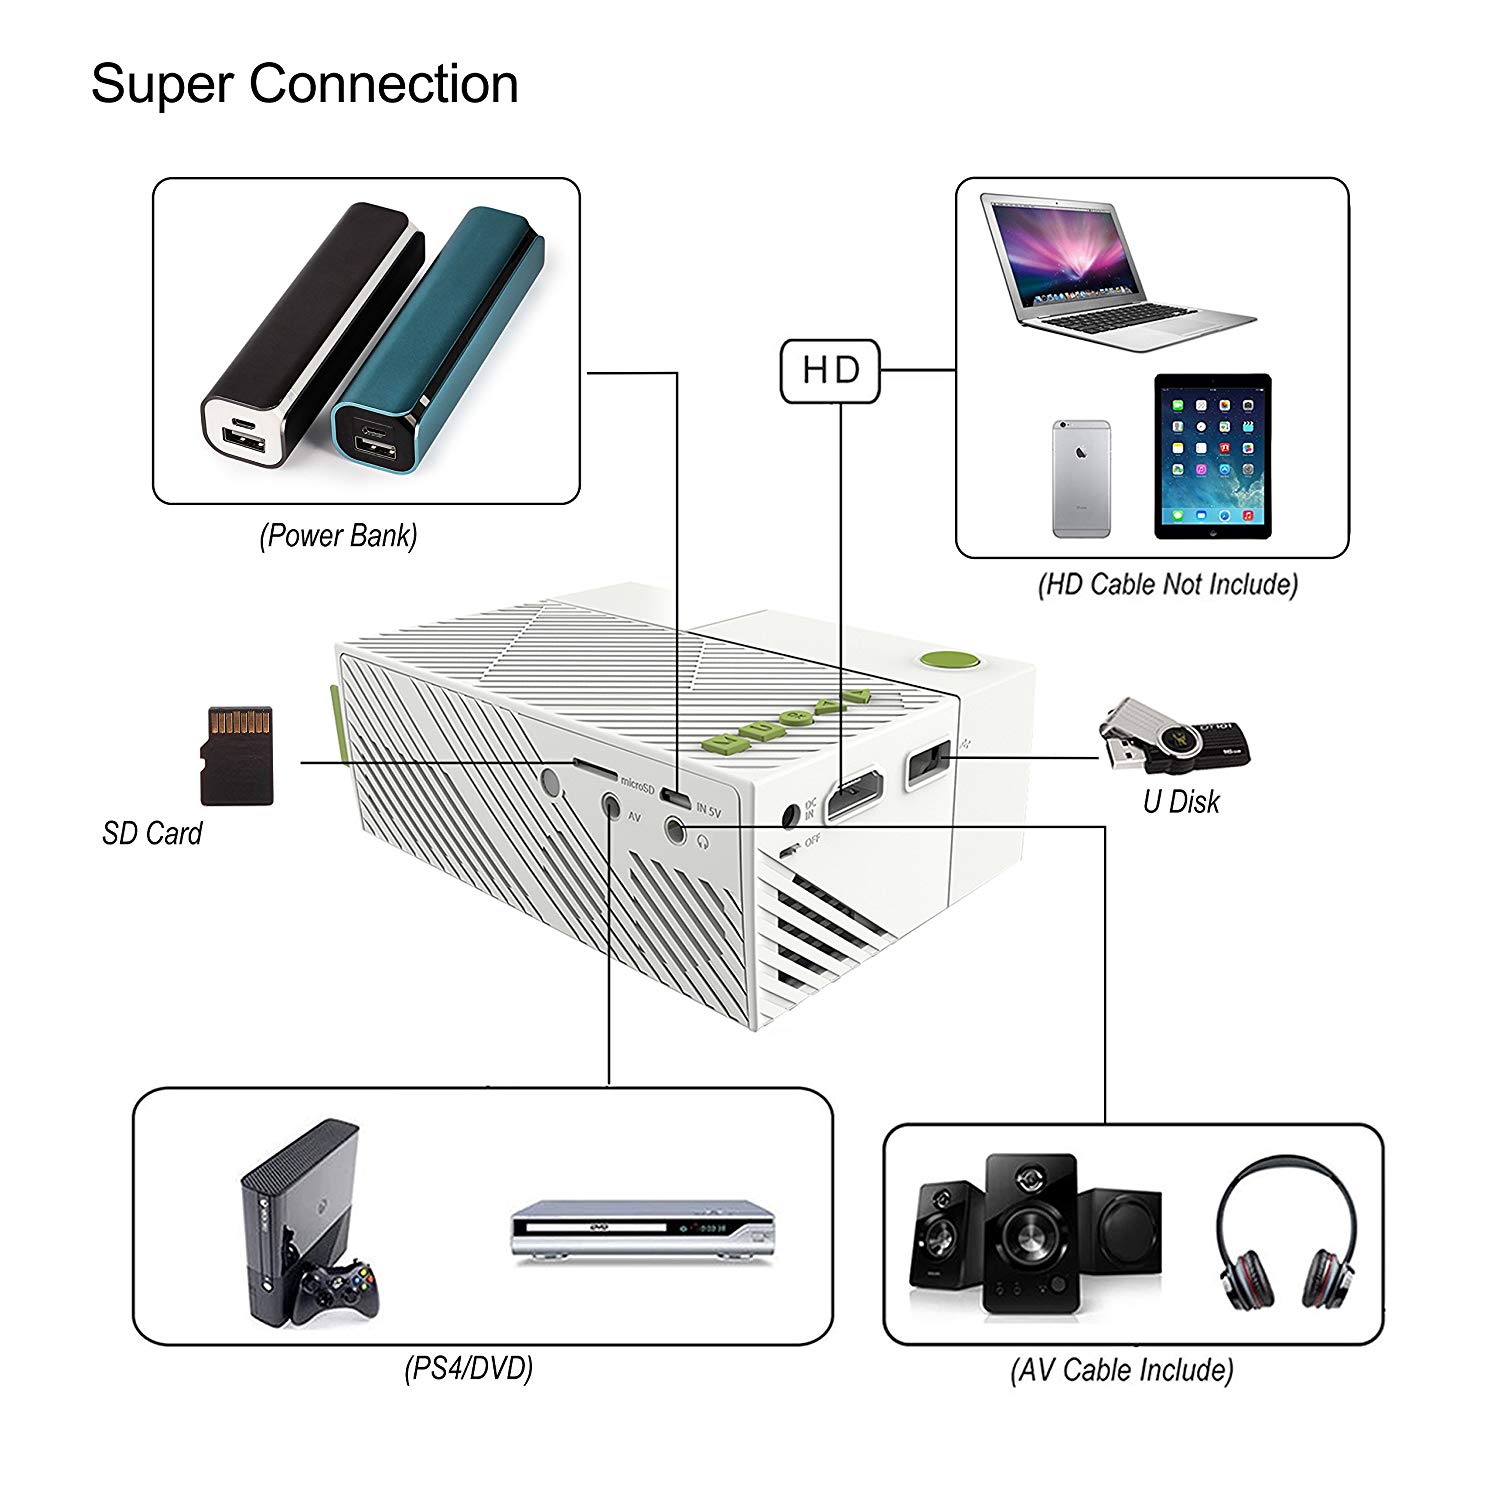 Super Connection: Power Bank, SD Card, U Disk, PS4/DVD, AV Cable Inside (HD cable not included)